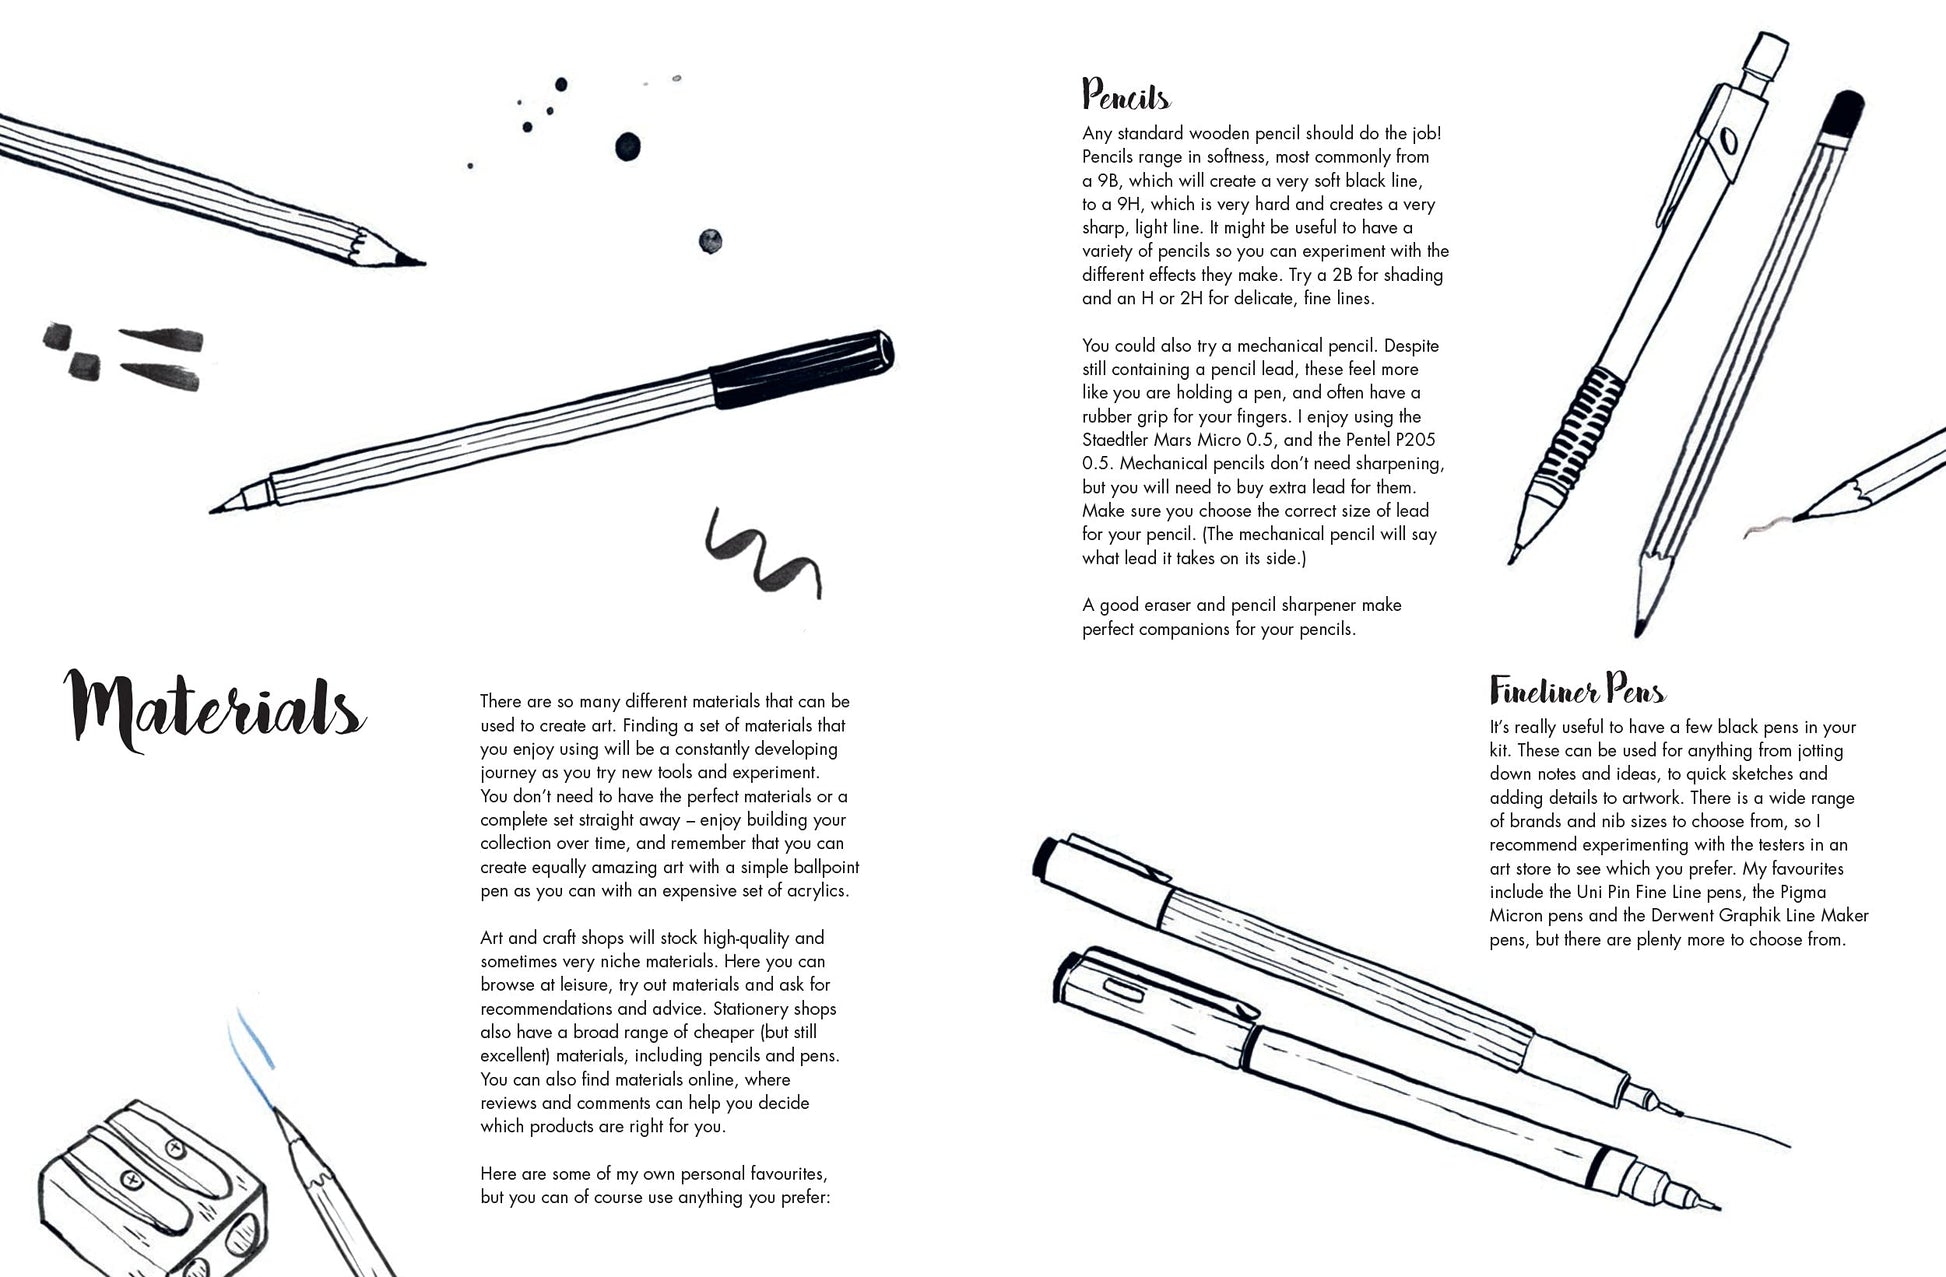 inside view with text, sketches of pens and pencils